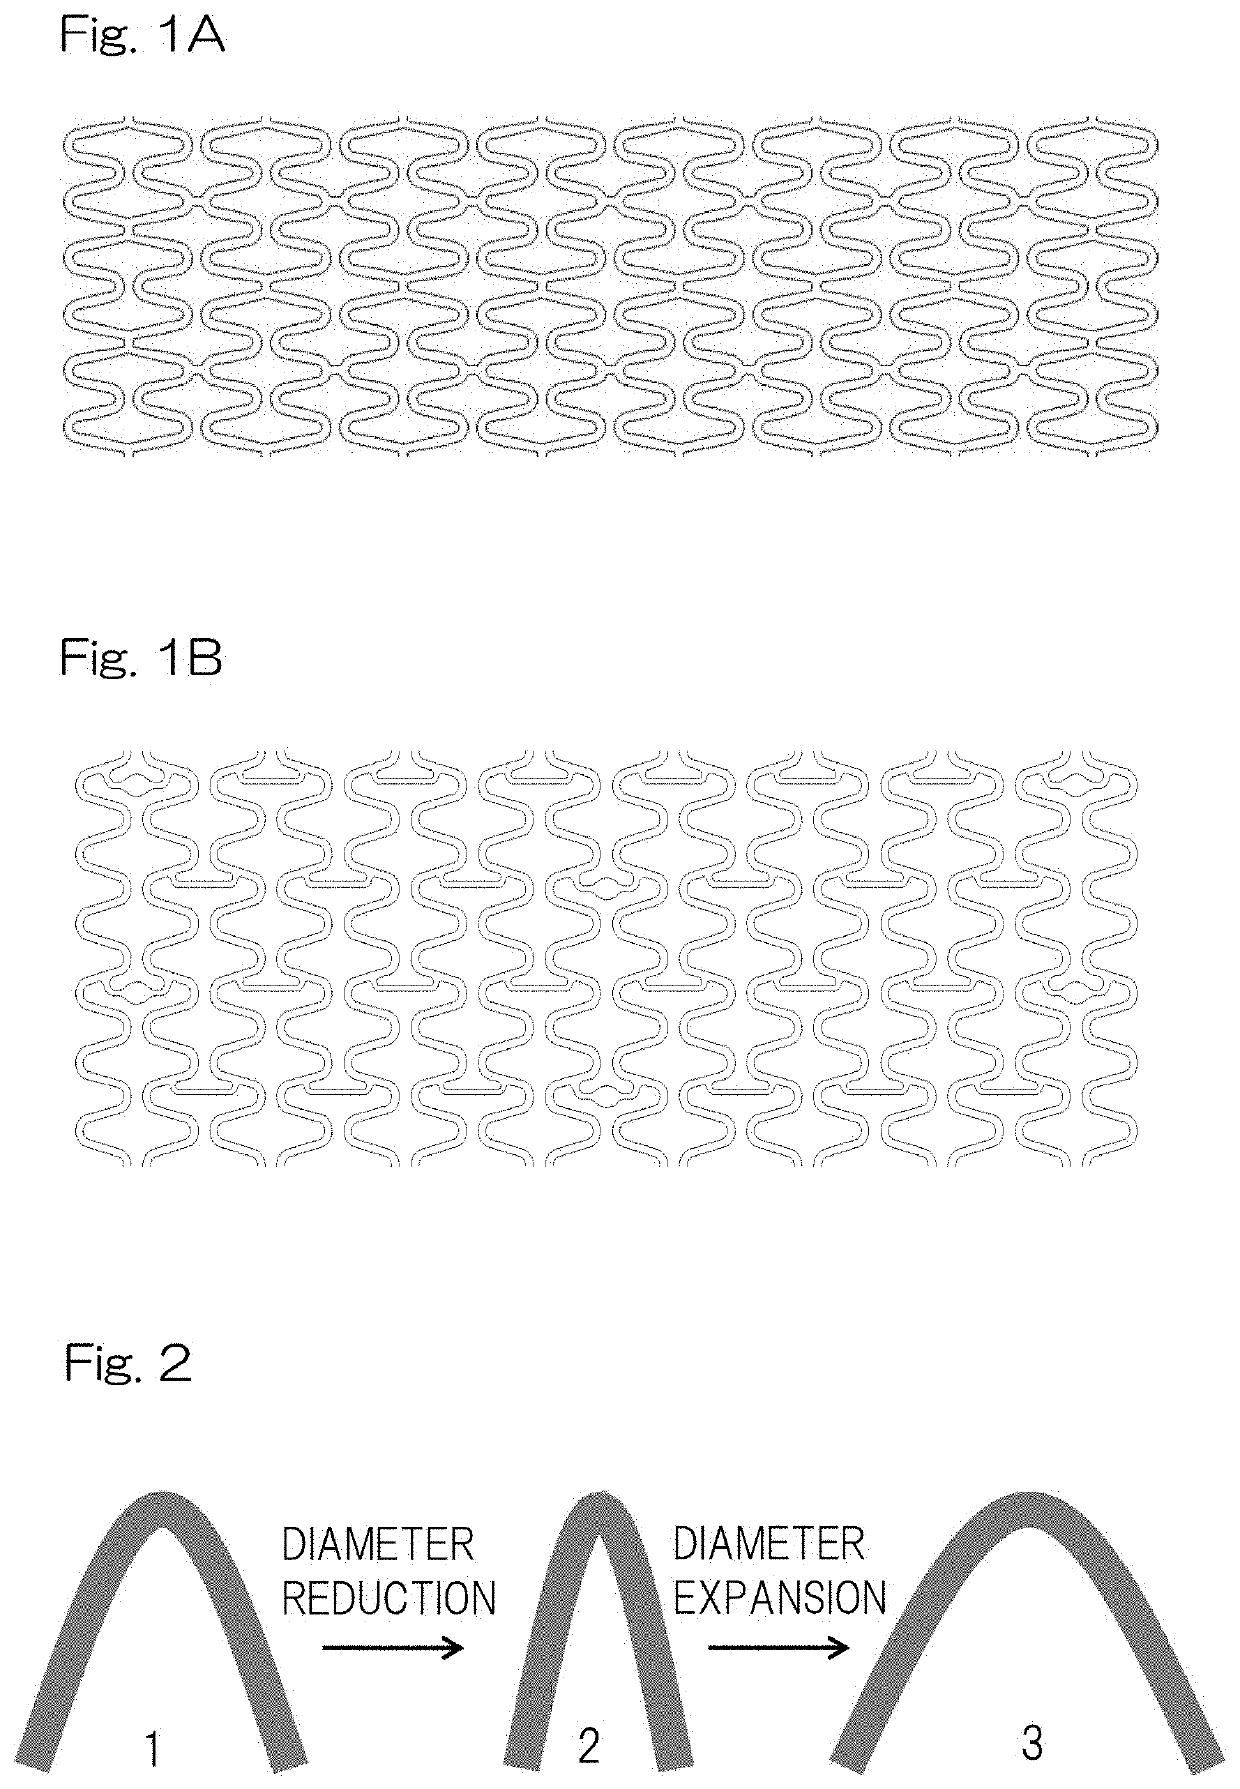 High performance bioabsorbable stent